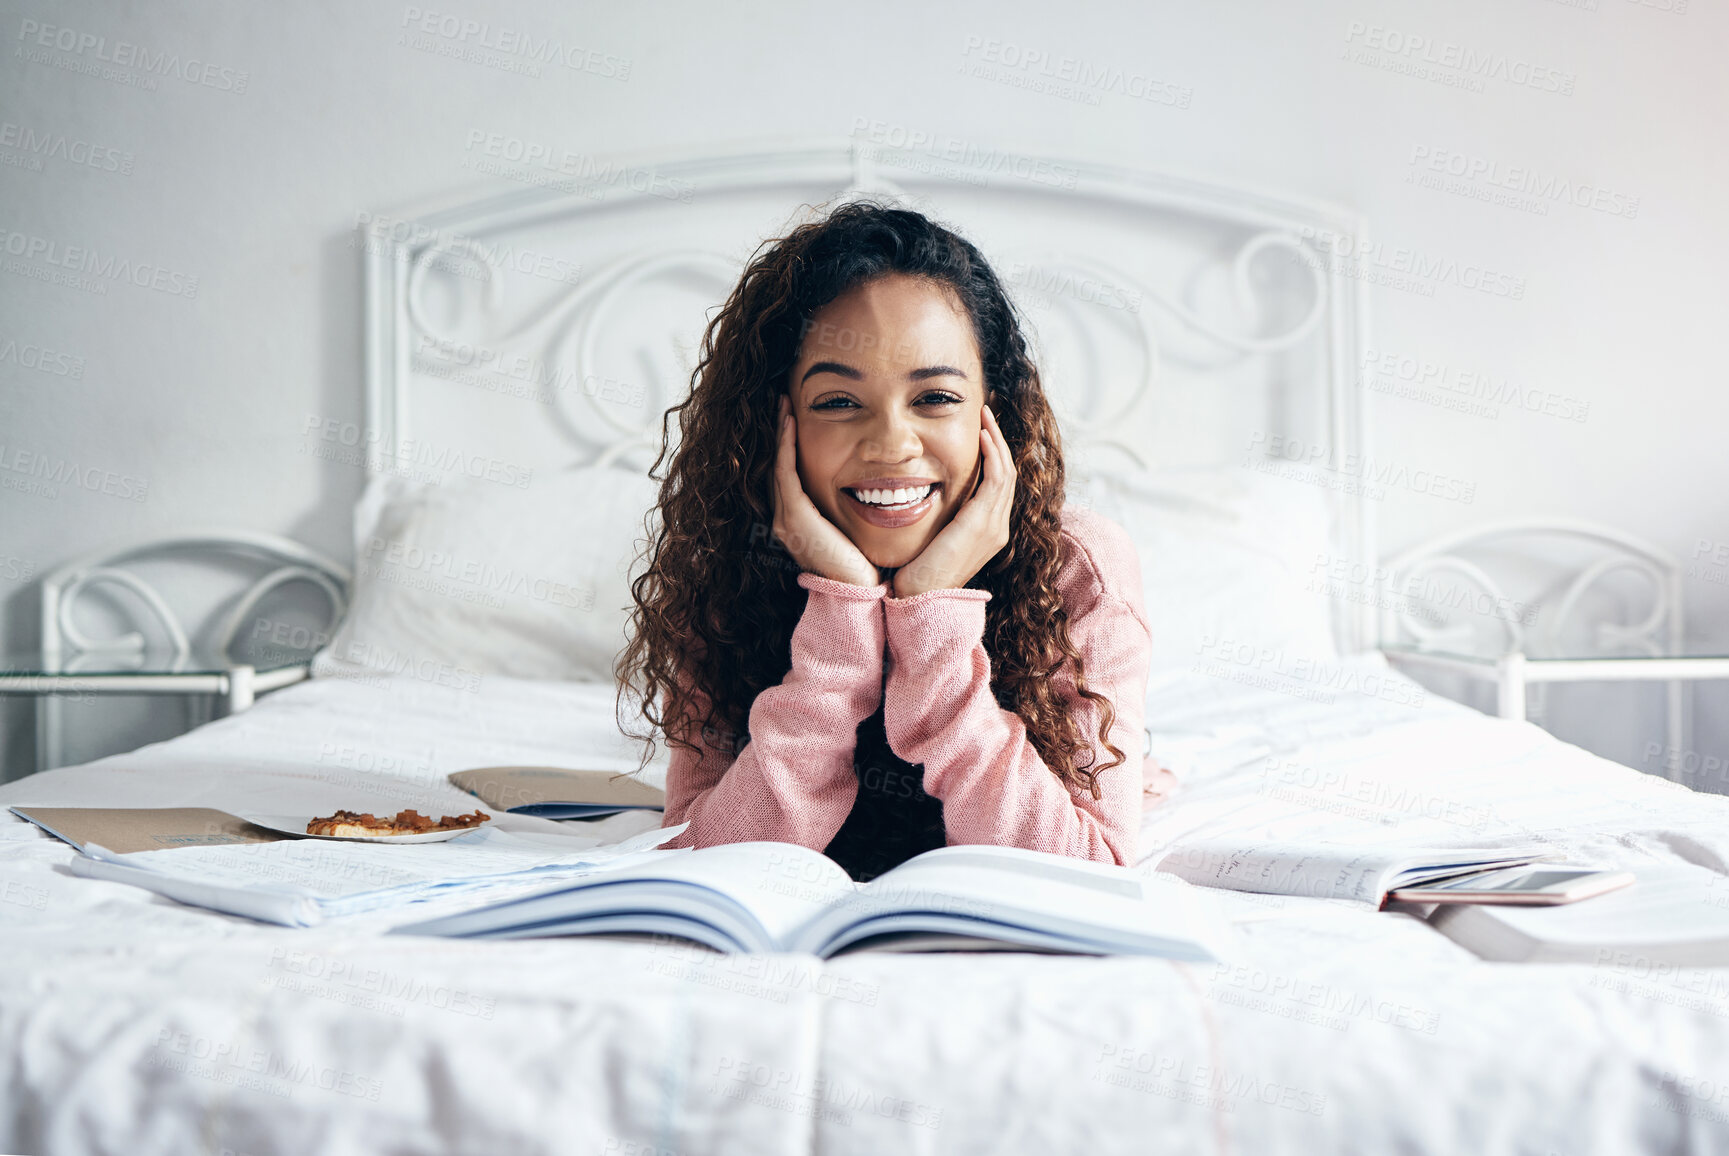 Buy stock photo Student books and bed with black woman learning and studying in a bedroom, happy and excited. Study, education and college preparation with portrait of girl with vision, thinking of goal and reading